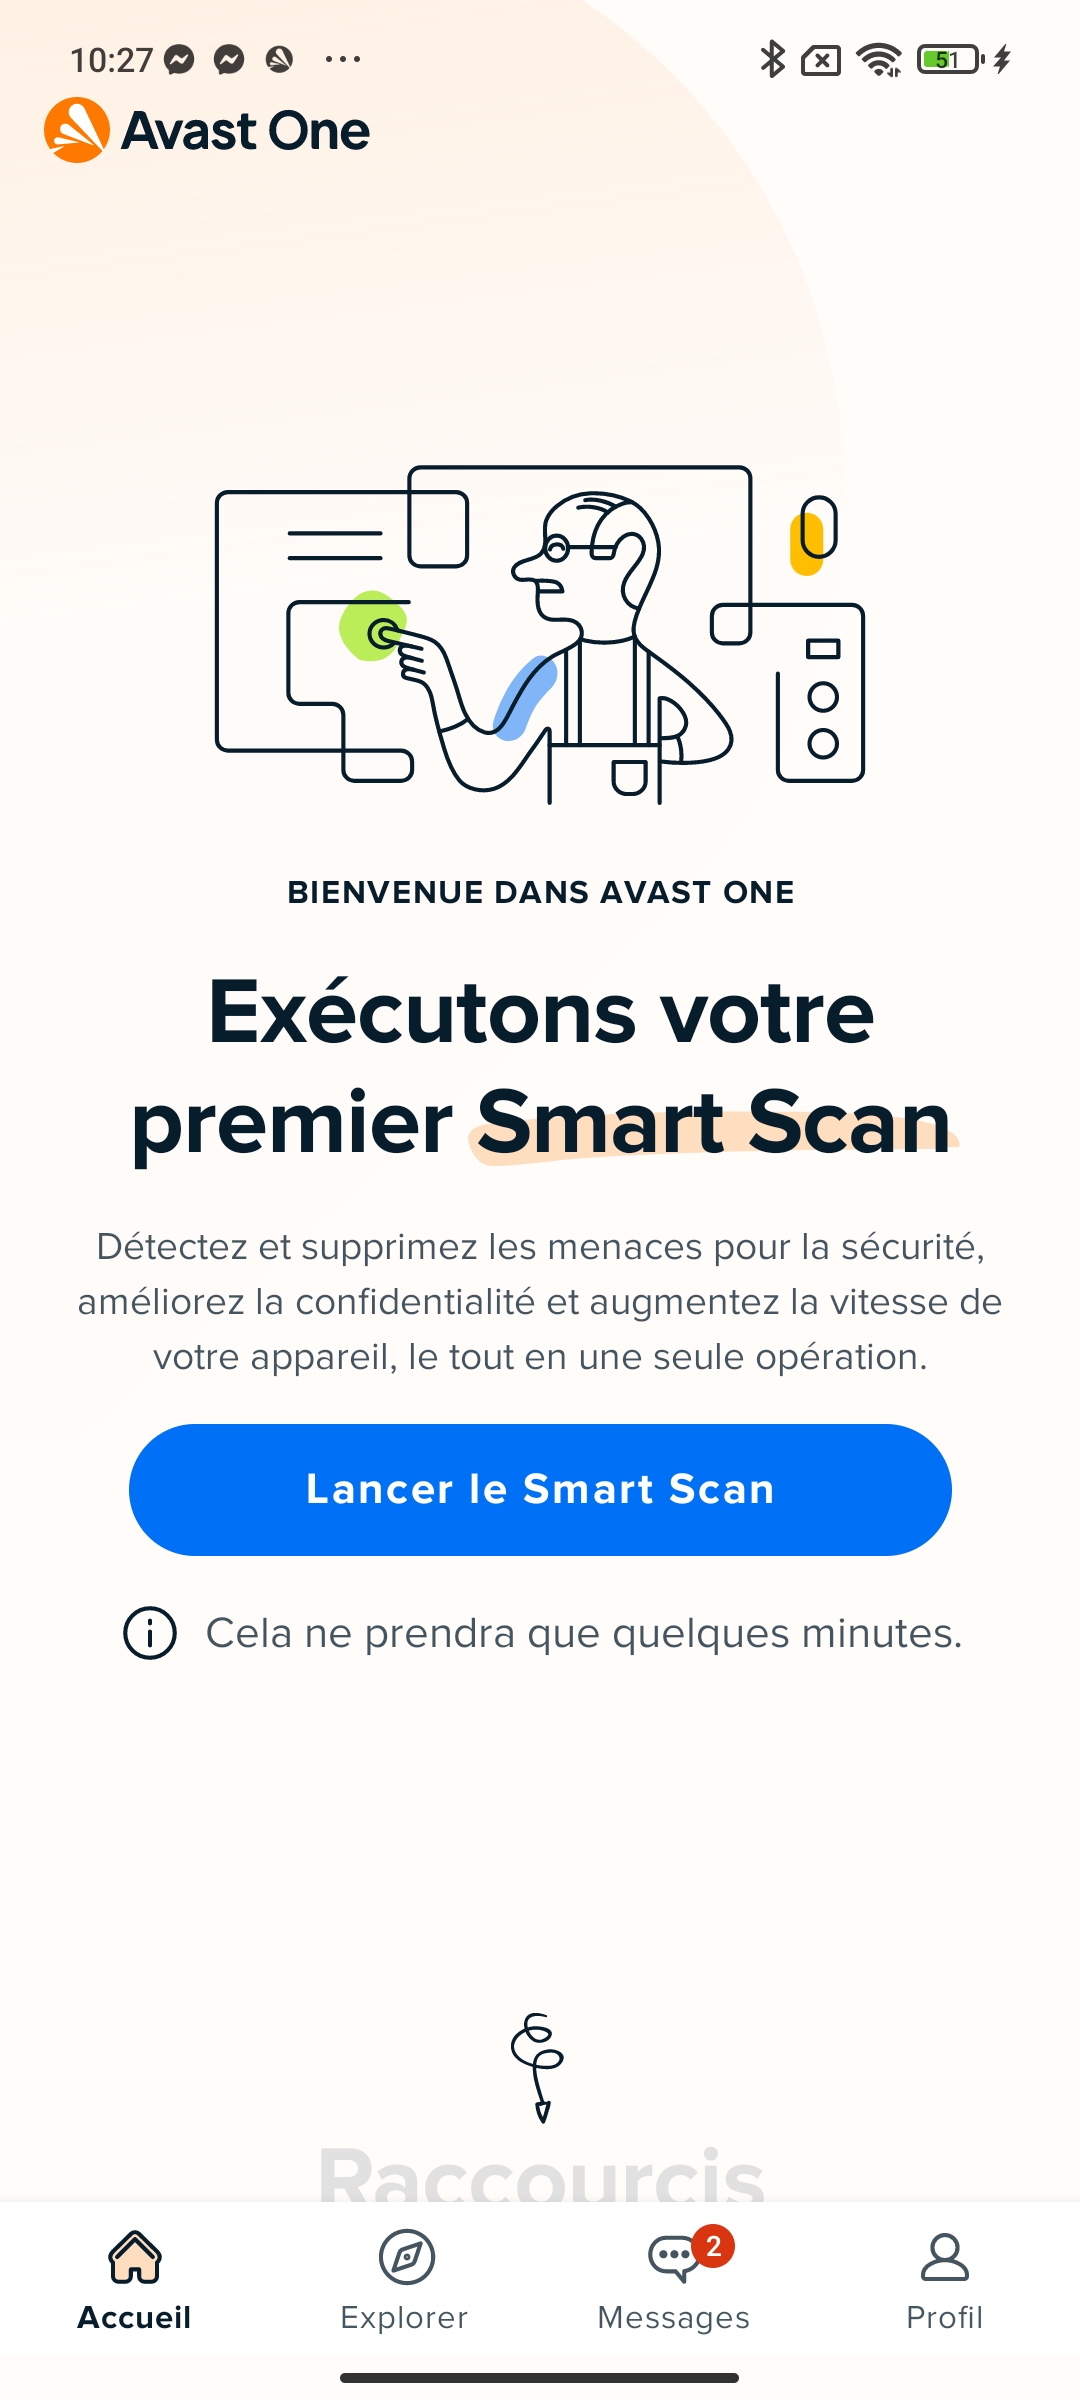 Avast One - Smart Scan